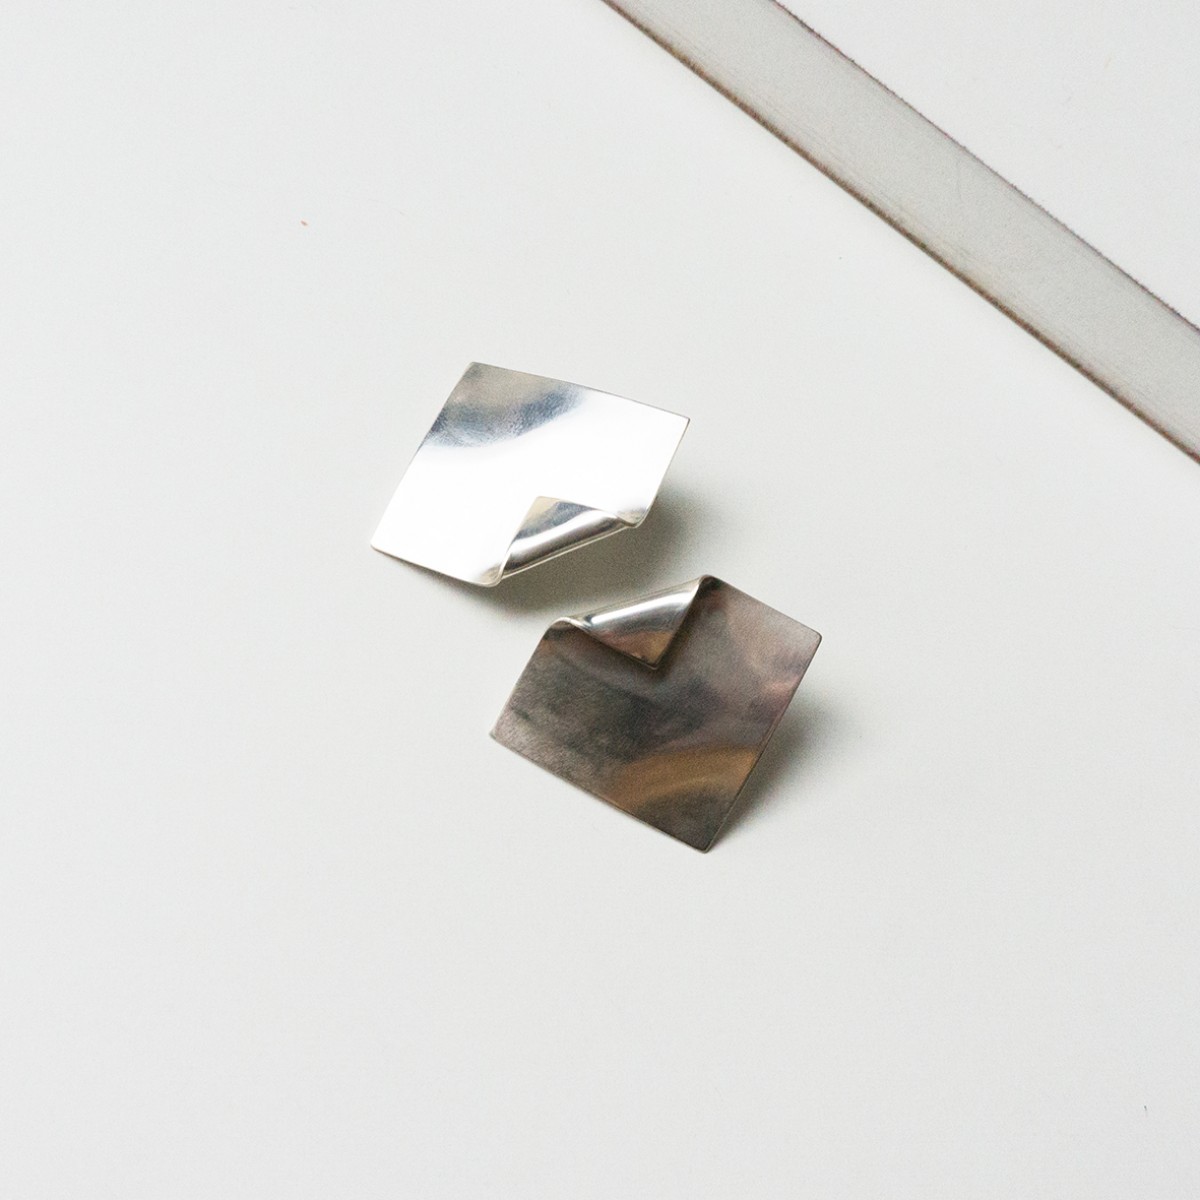 Puur Jewellery - Silber Ohrring No.2 - Folded Collection